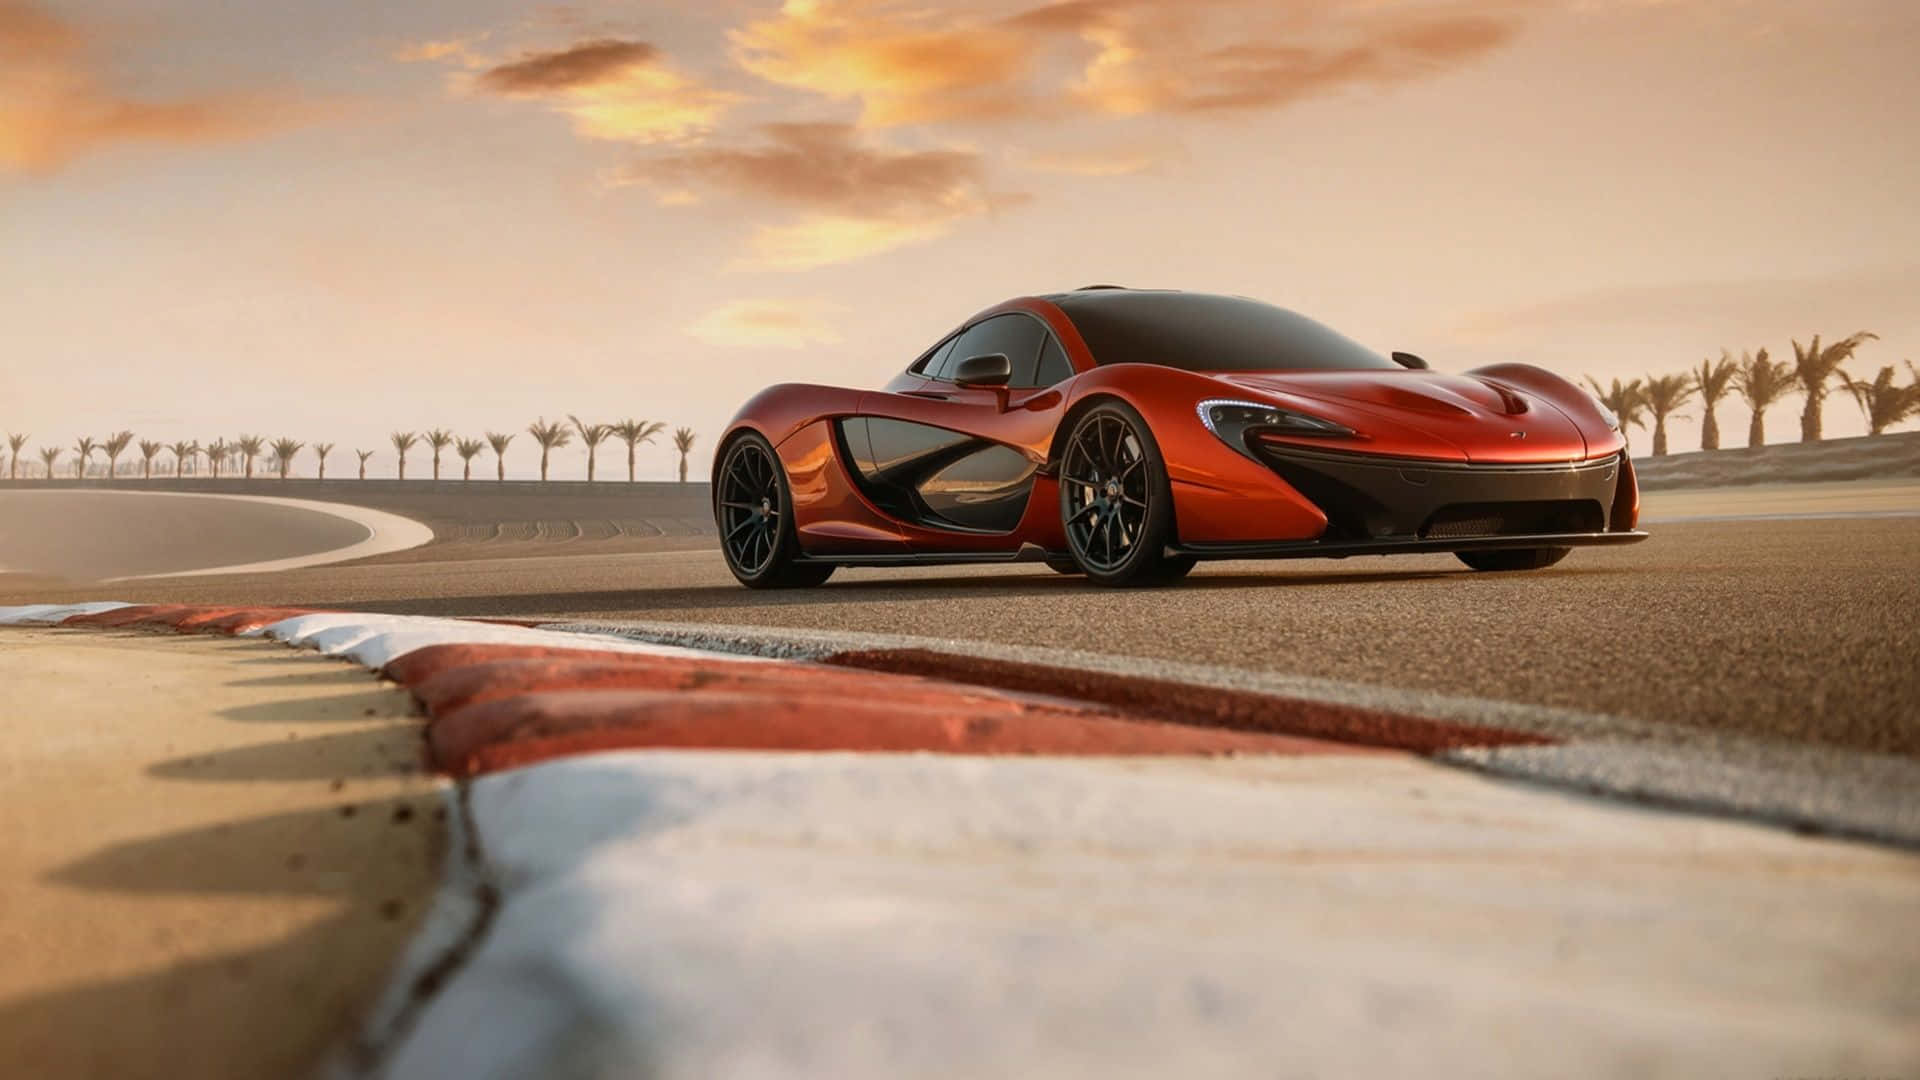 The Ultimate Harmony Of Speed And Elegance - Mclaren P1 Wallpaper